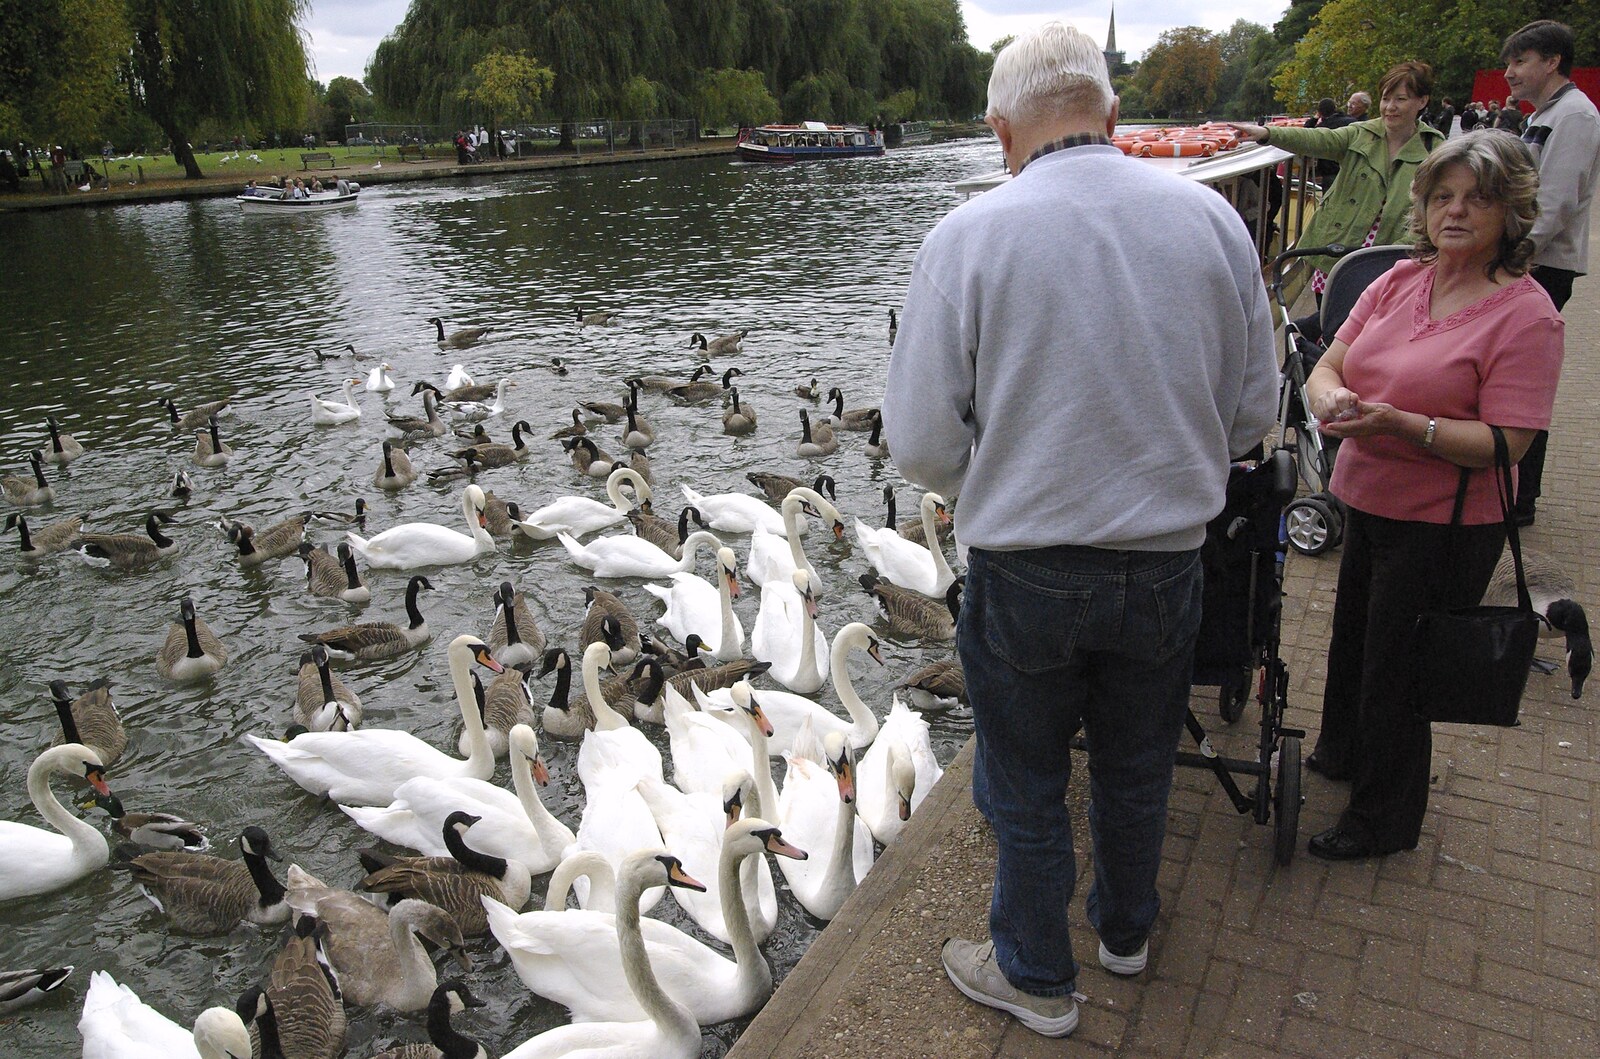 Matt's Wedding Reception, and a BSCC Presentation, Brome, Solihull and Stratford upon Avon - 6th October 2007: Some dude feeds the multitude of swans